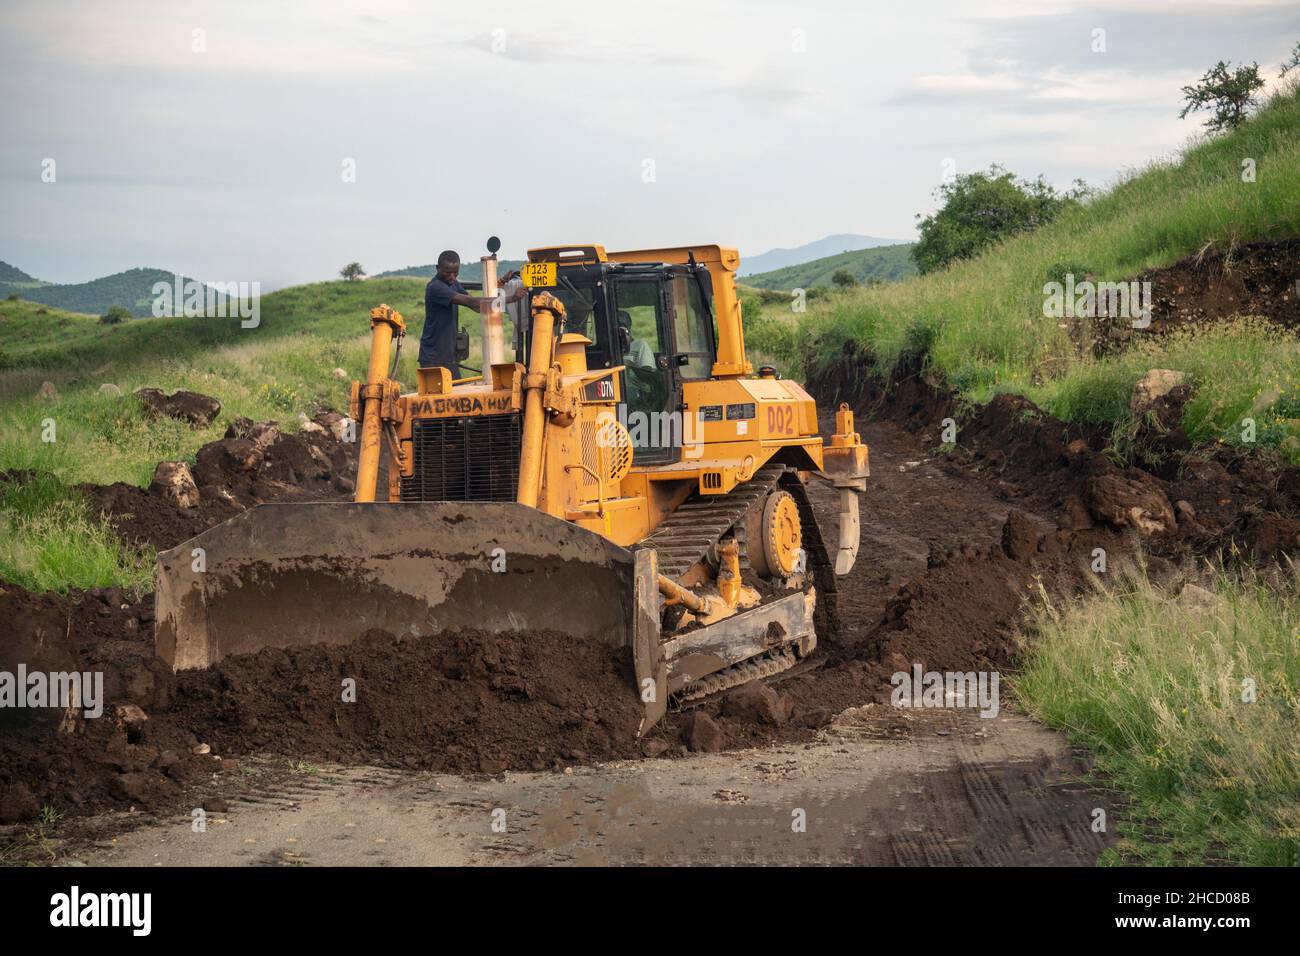 Tanzania, Arusha - January 2020: Excavator is Making Road in African Savannah. Group of African black men working for the construction of a road over Stock Photo